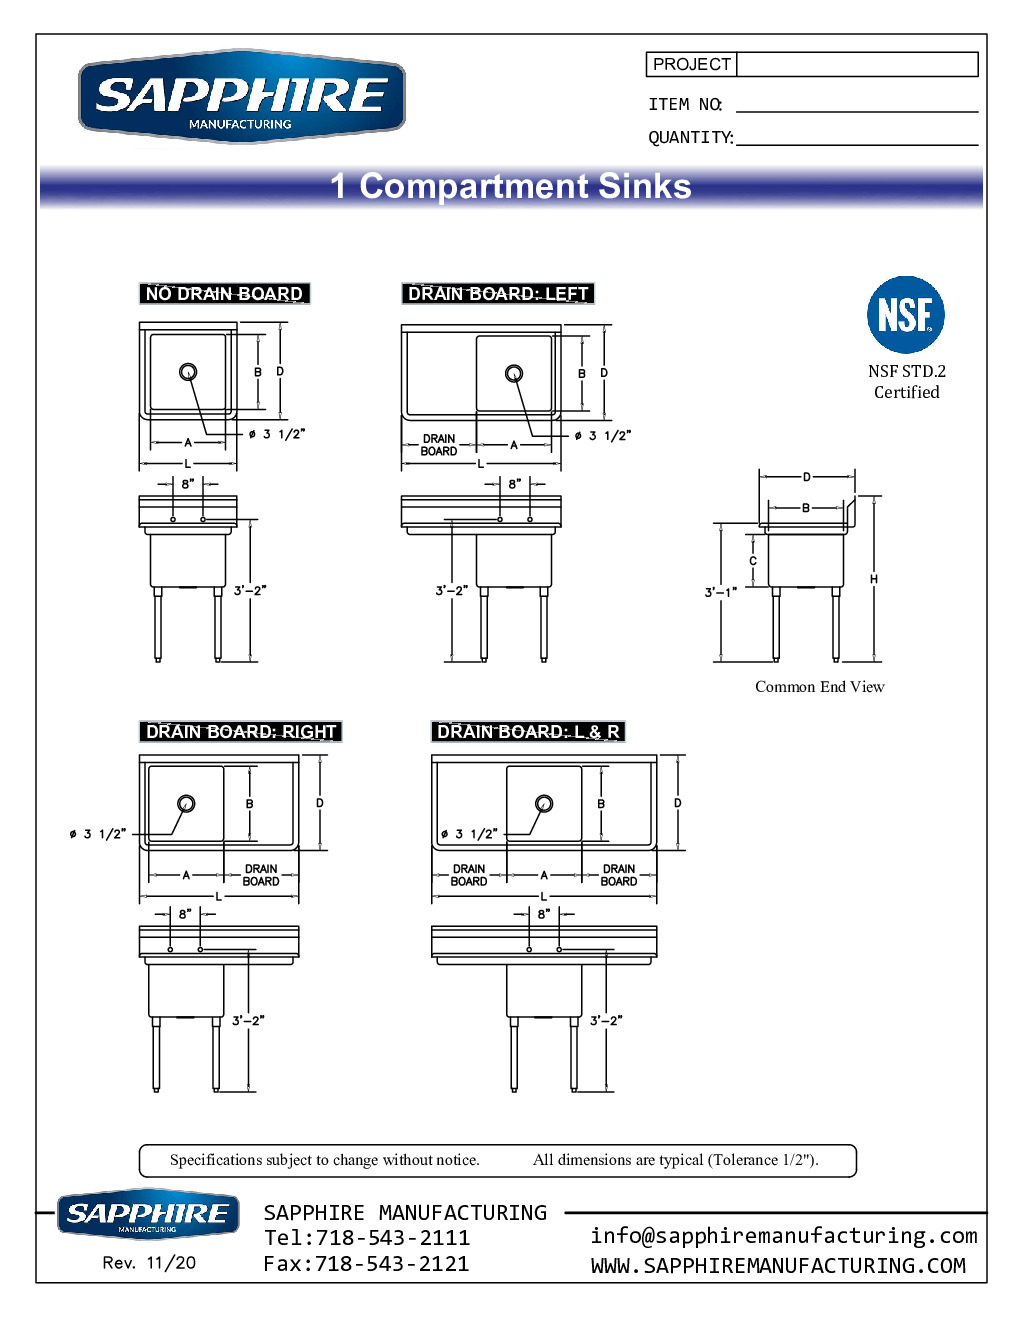 Sapphire Manufacturing SMS-1821R (1) One Compartment Sink